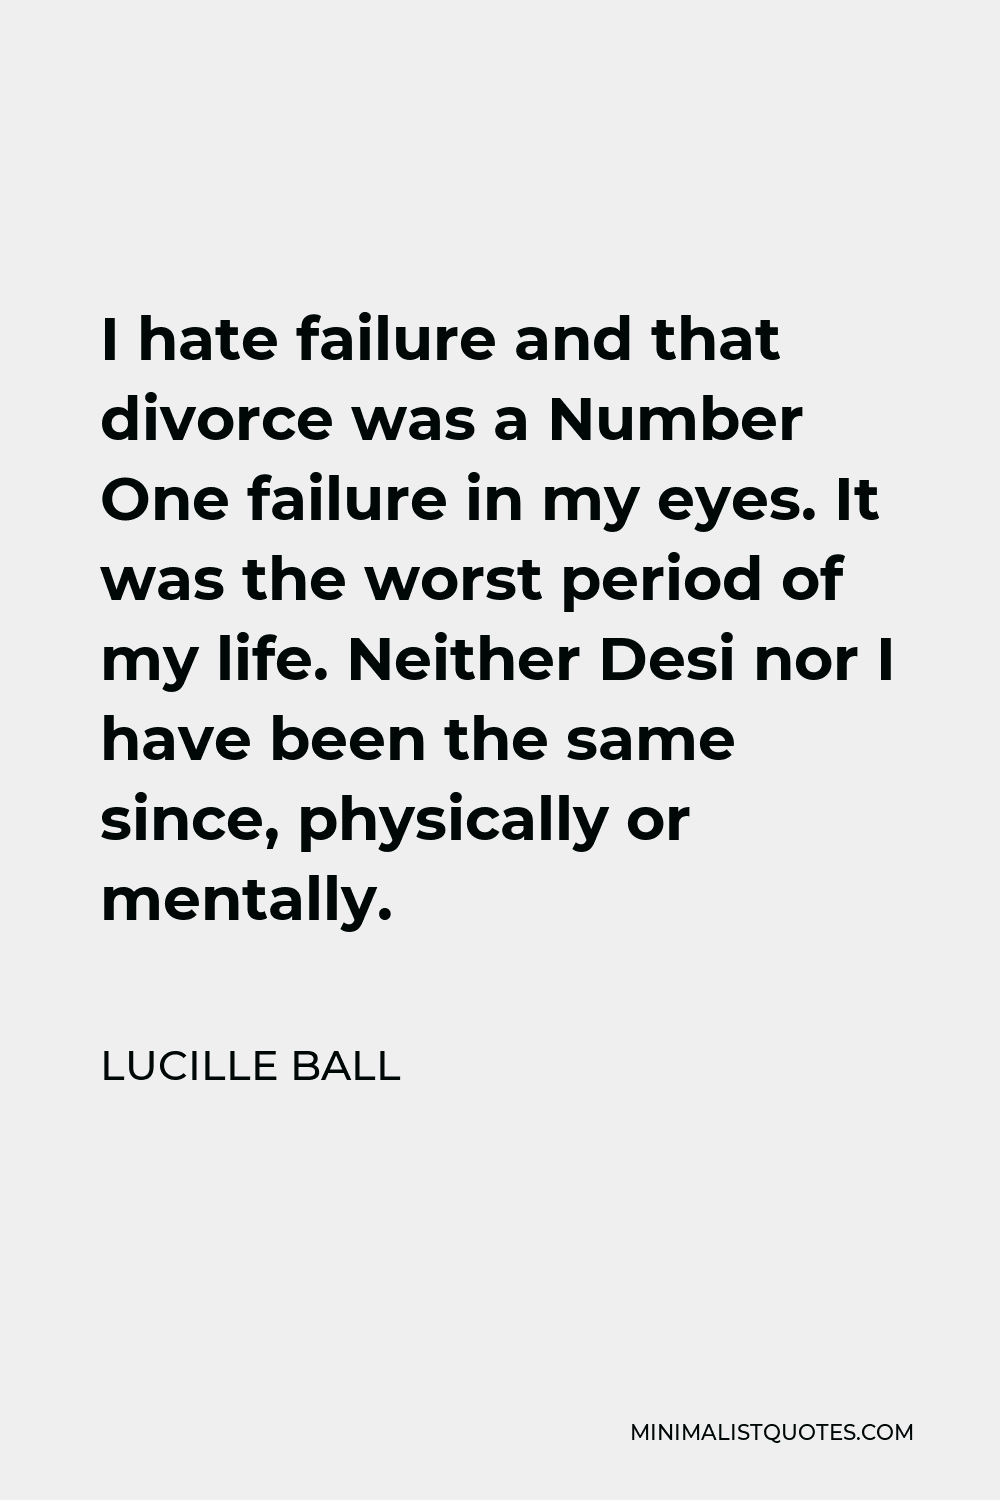 Lucille Ball Quote - I hate failure and that divorce was a Number One failure in my eyes. It was the worst period of my life. Neither Desi nor I have been the same since, physically or mentally.